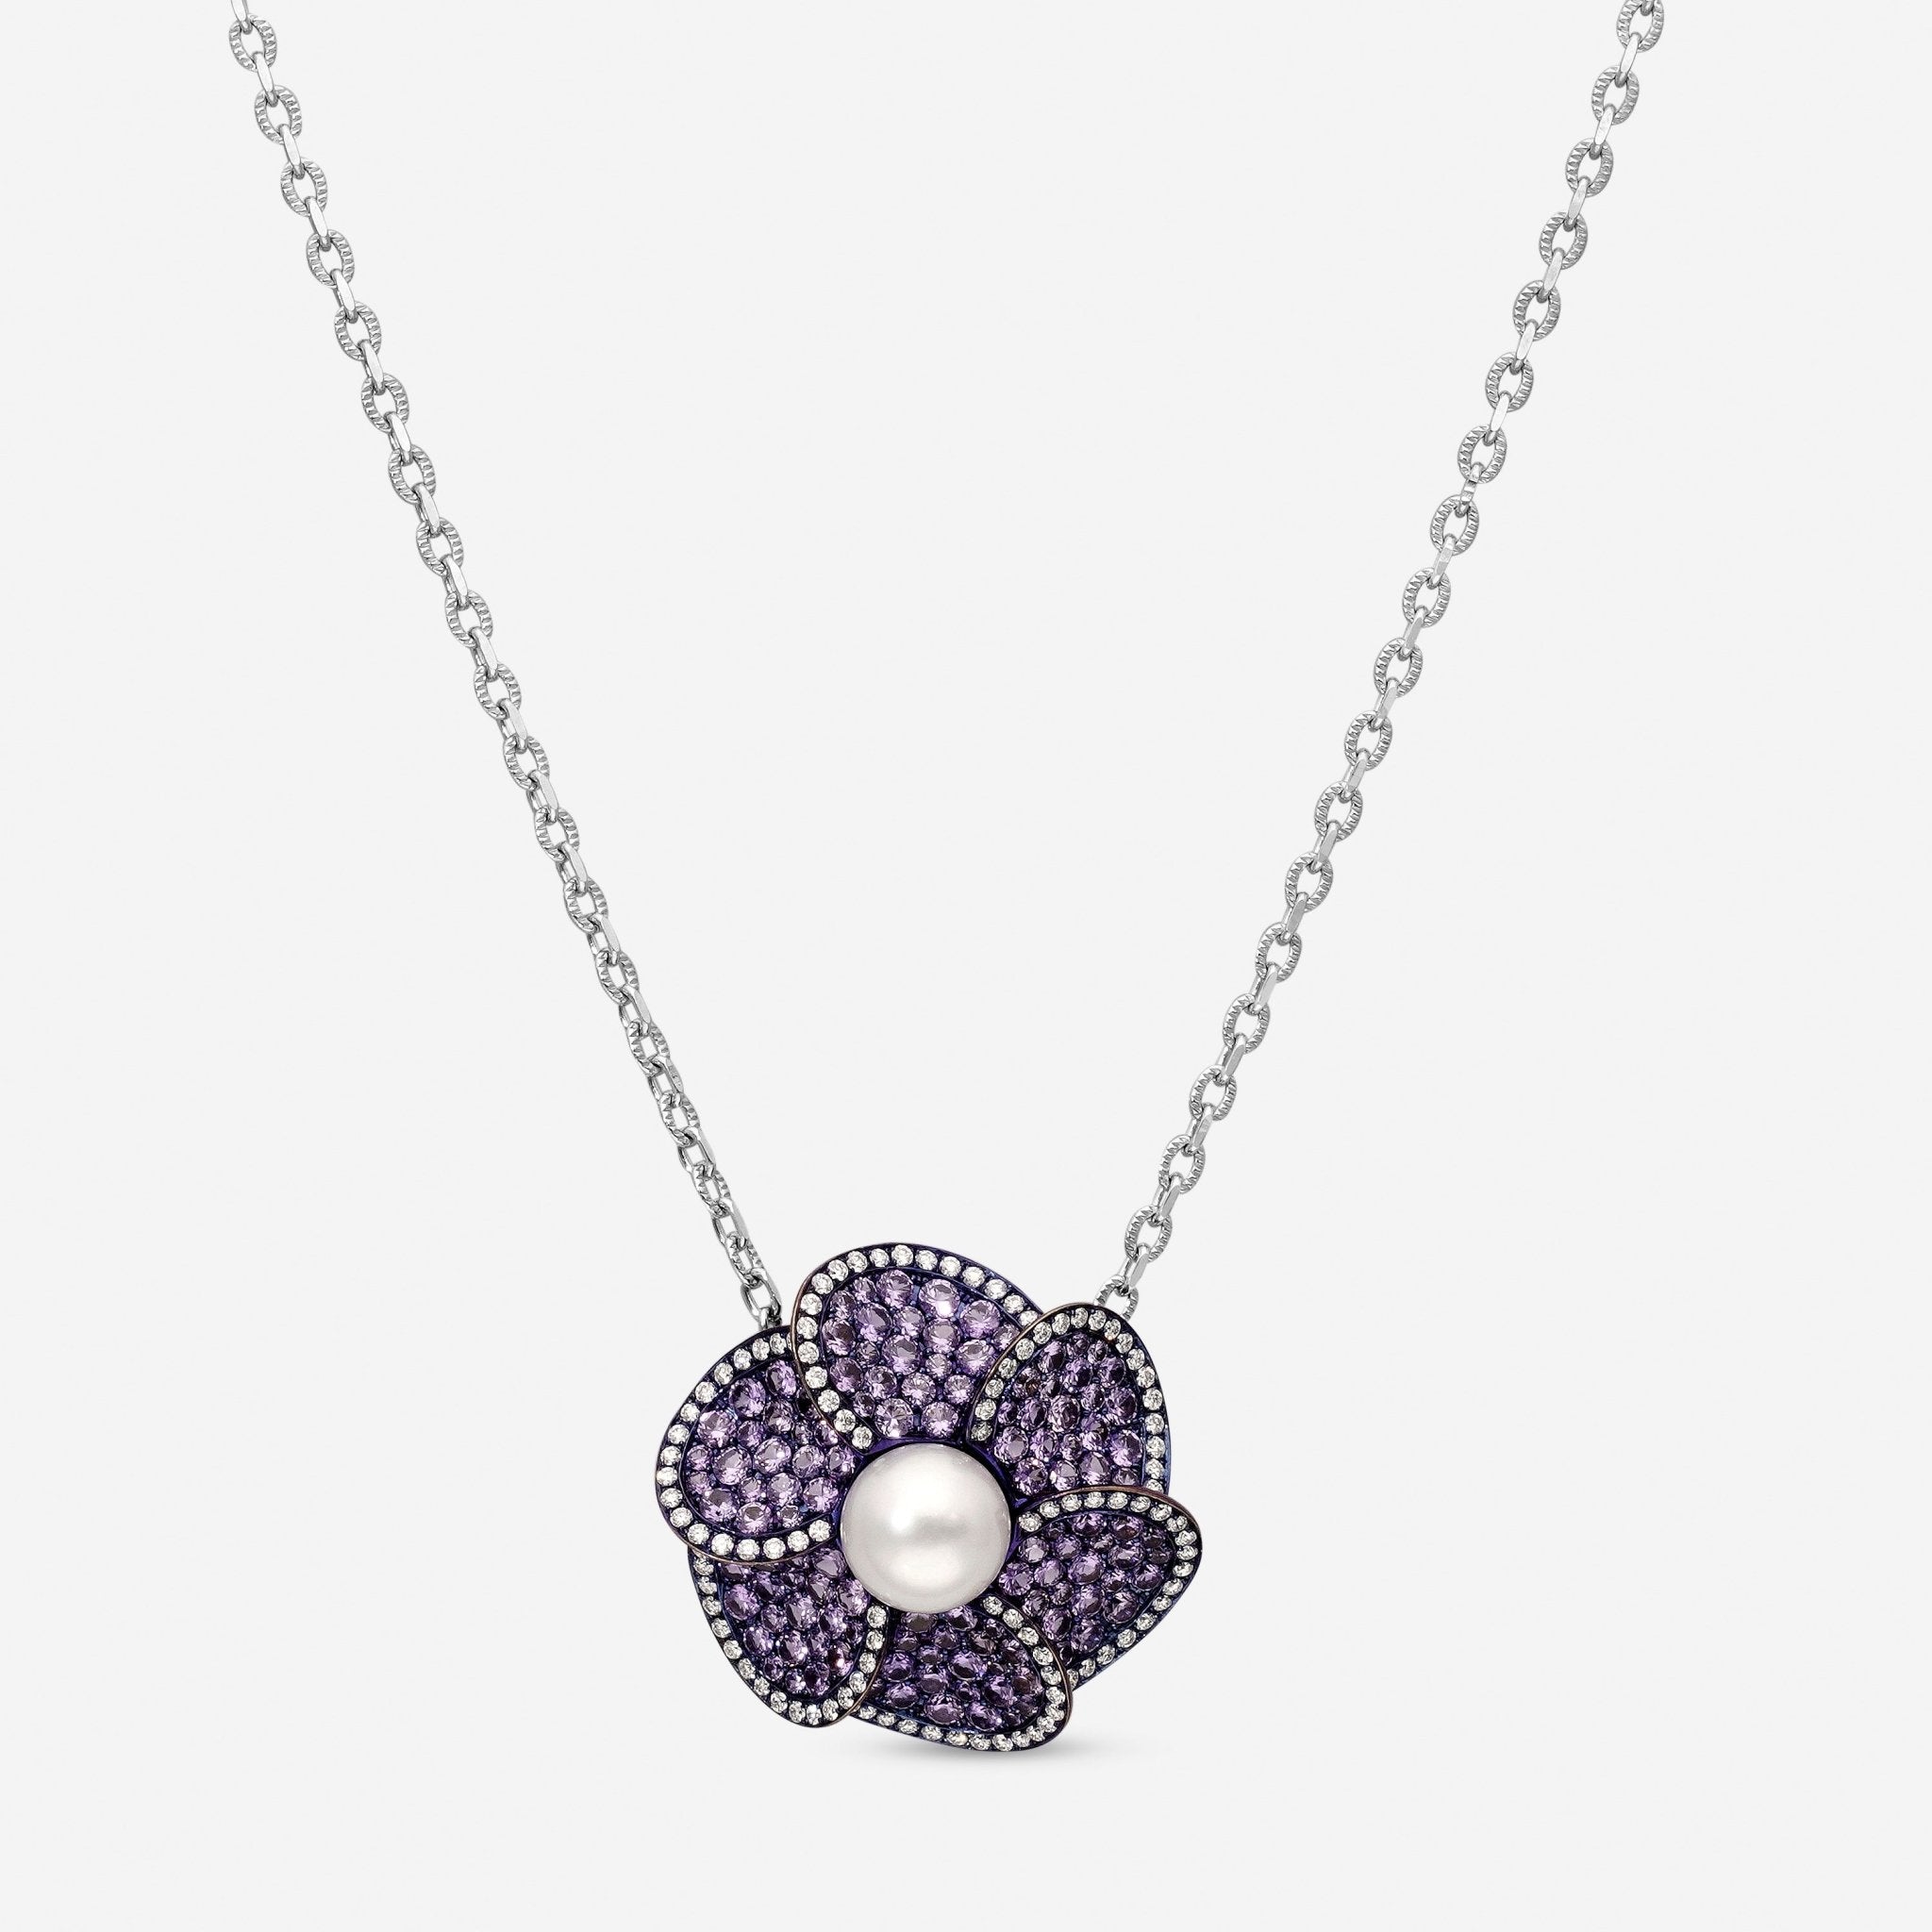 Assael 18K White Gold and Titanium Diamond 0.52ct. tw. and Japanese Akoya Cultured Pearl Pendant Necklace AFP0002 - THE SOLIST - Assael